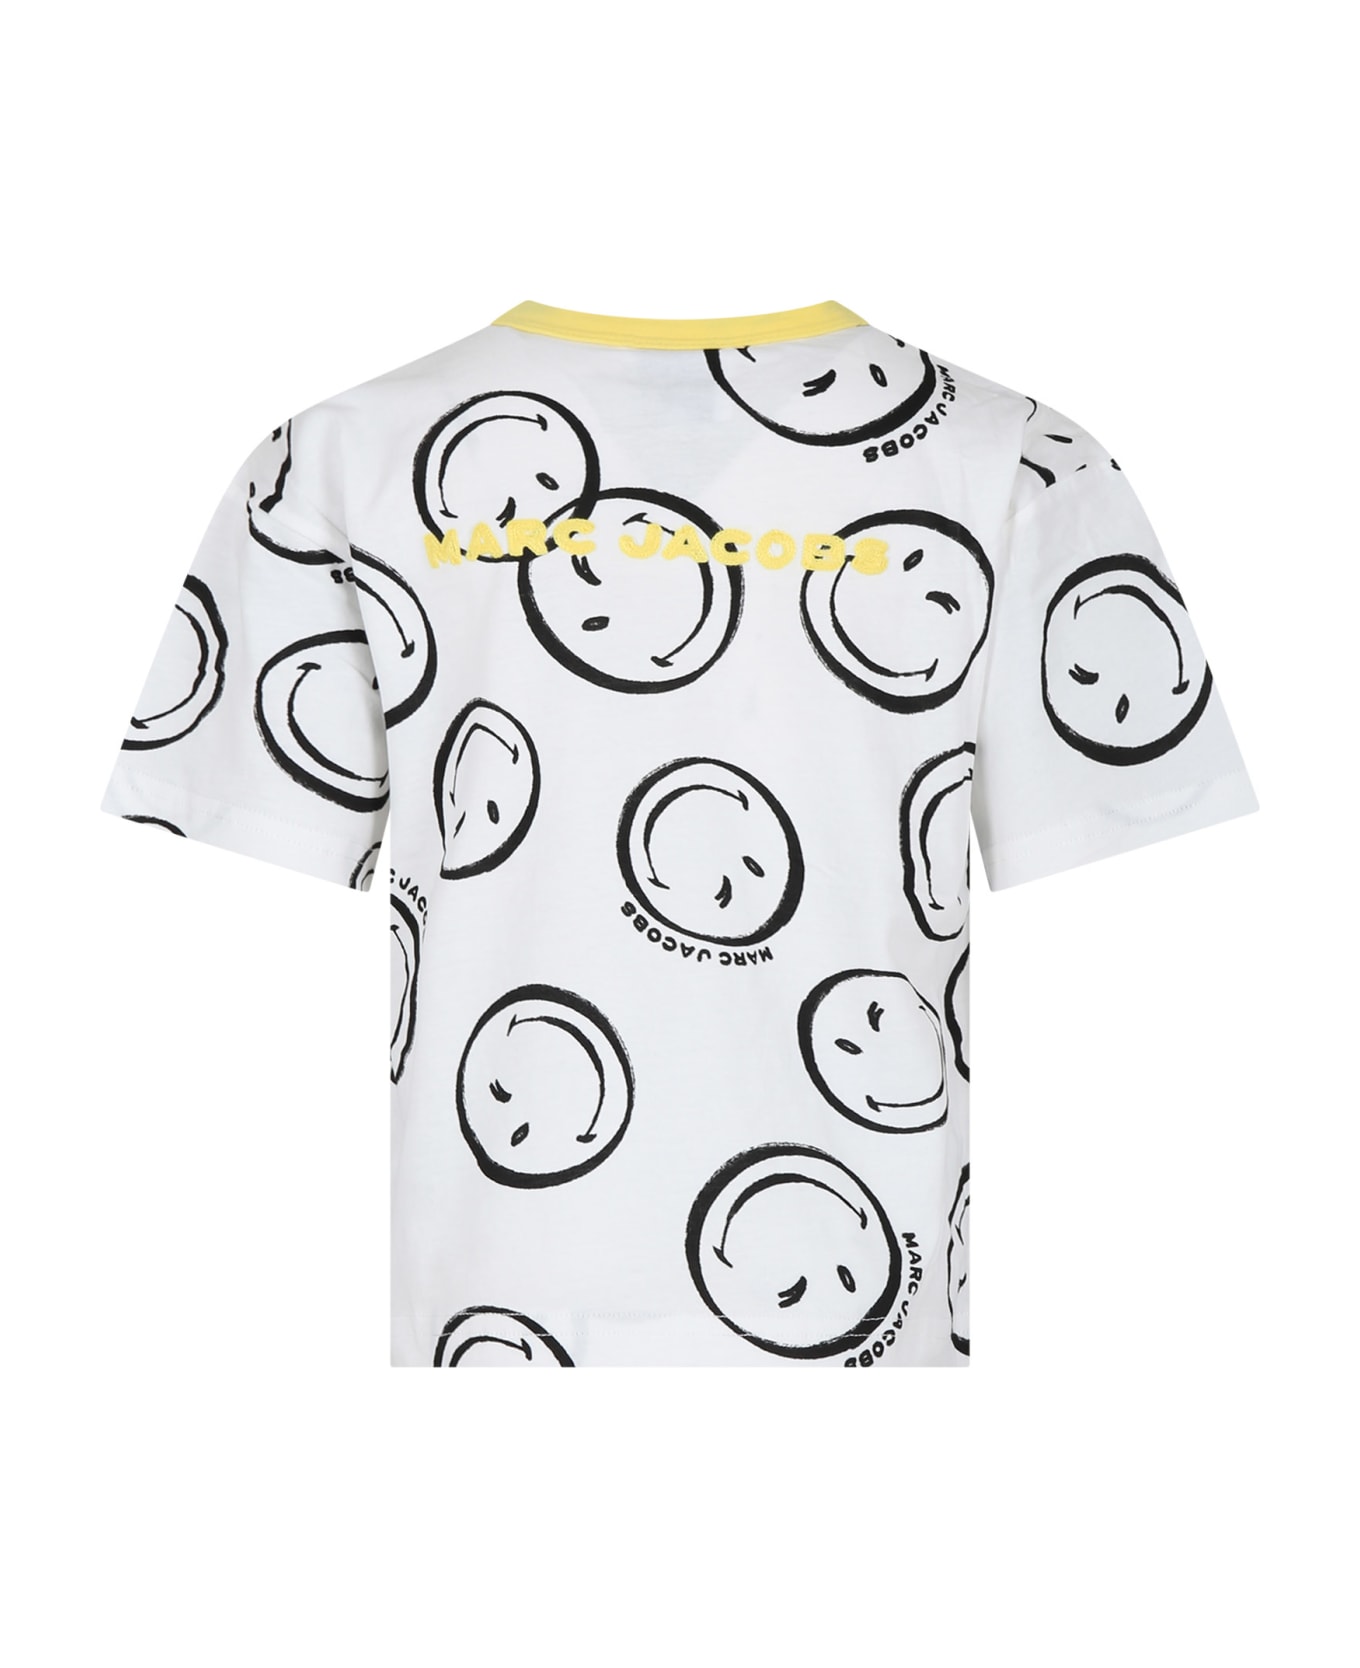 Marc Jacobs White T-shirt For Kids With Logo - White